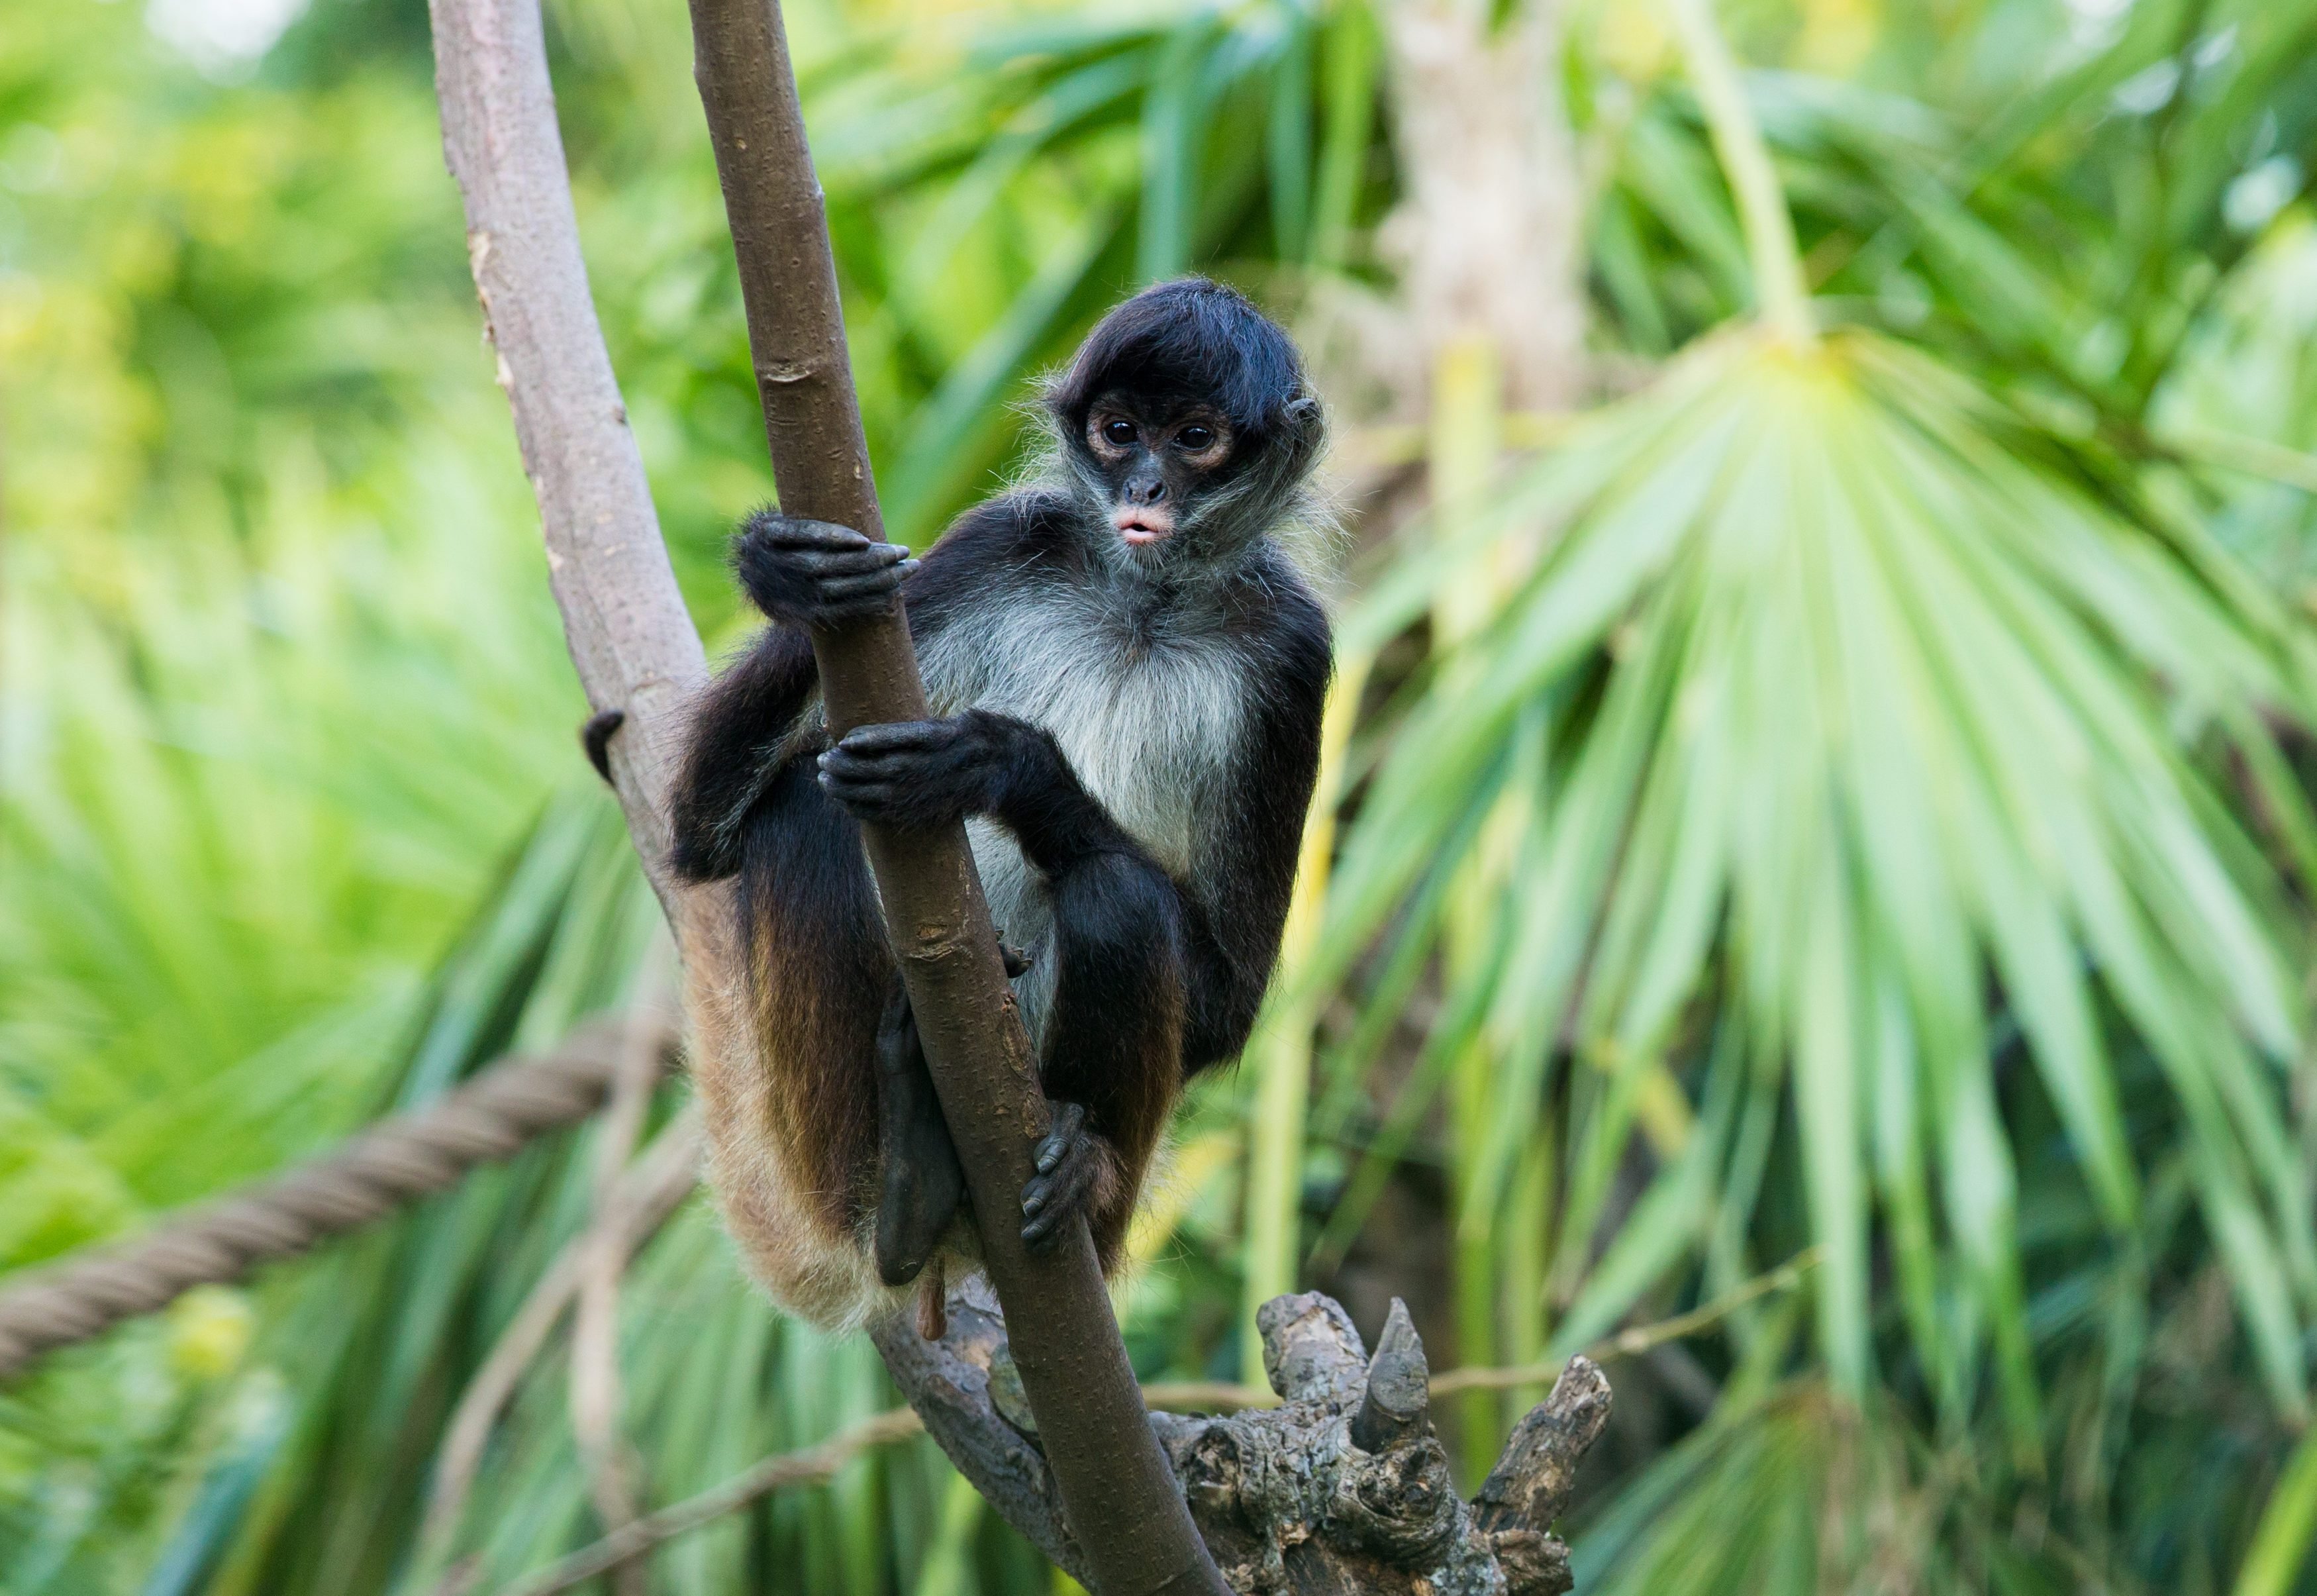 How Many Types of Monkeys Are There in the World? | Reader's Digest